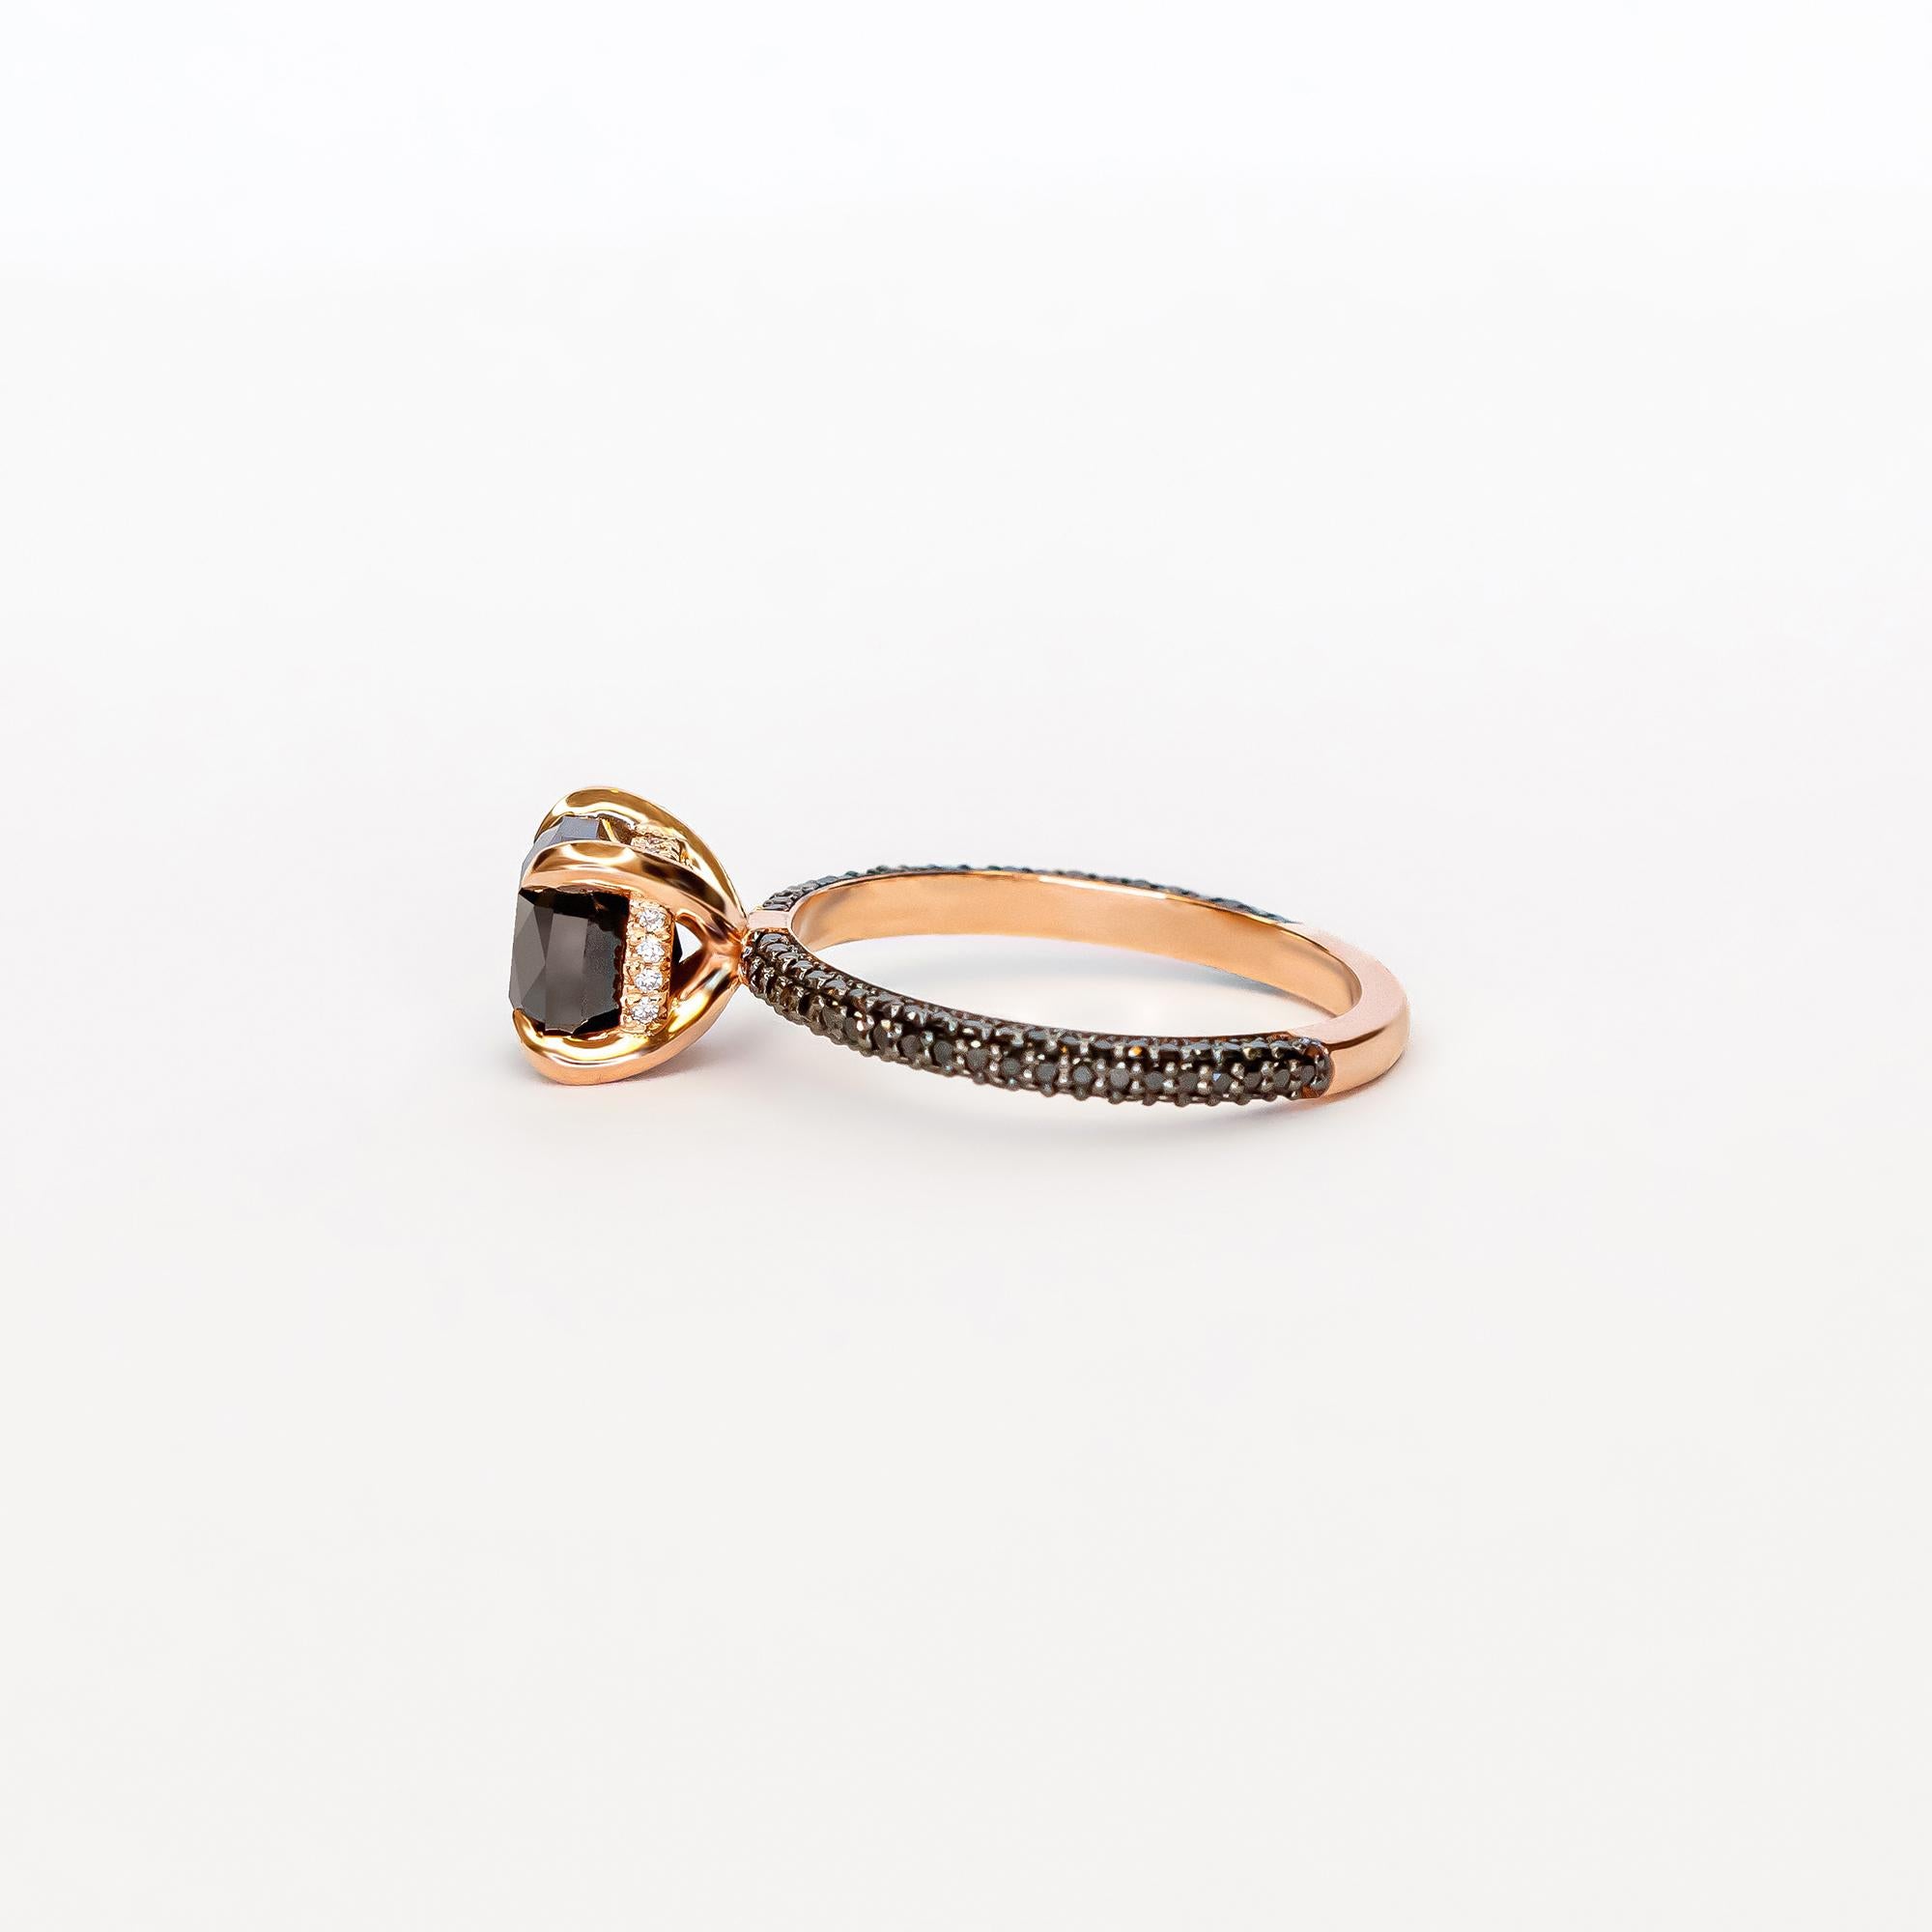 2.5cts Ooak Cushion Cut Natural Black&White Diamond Statement Ring in Rose Gold For Sale 6